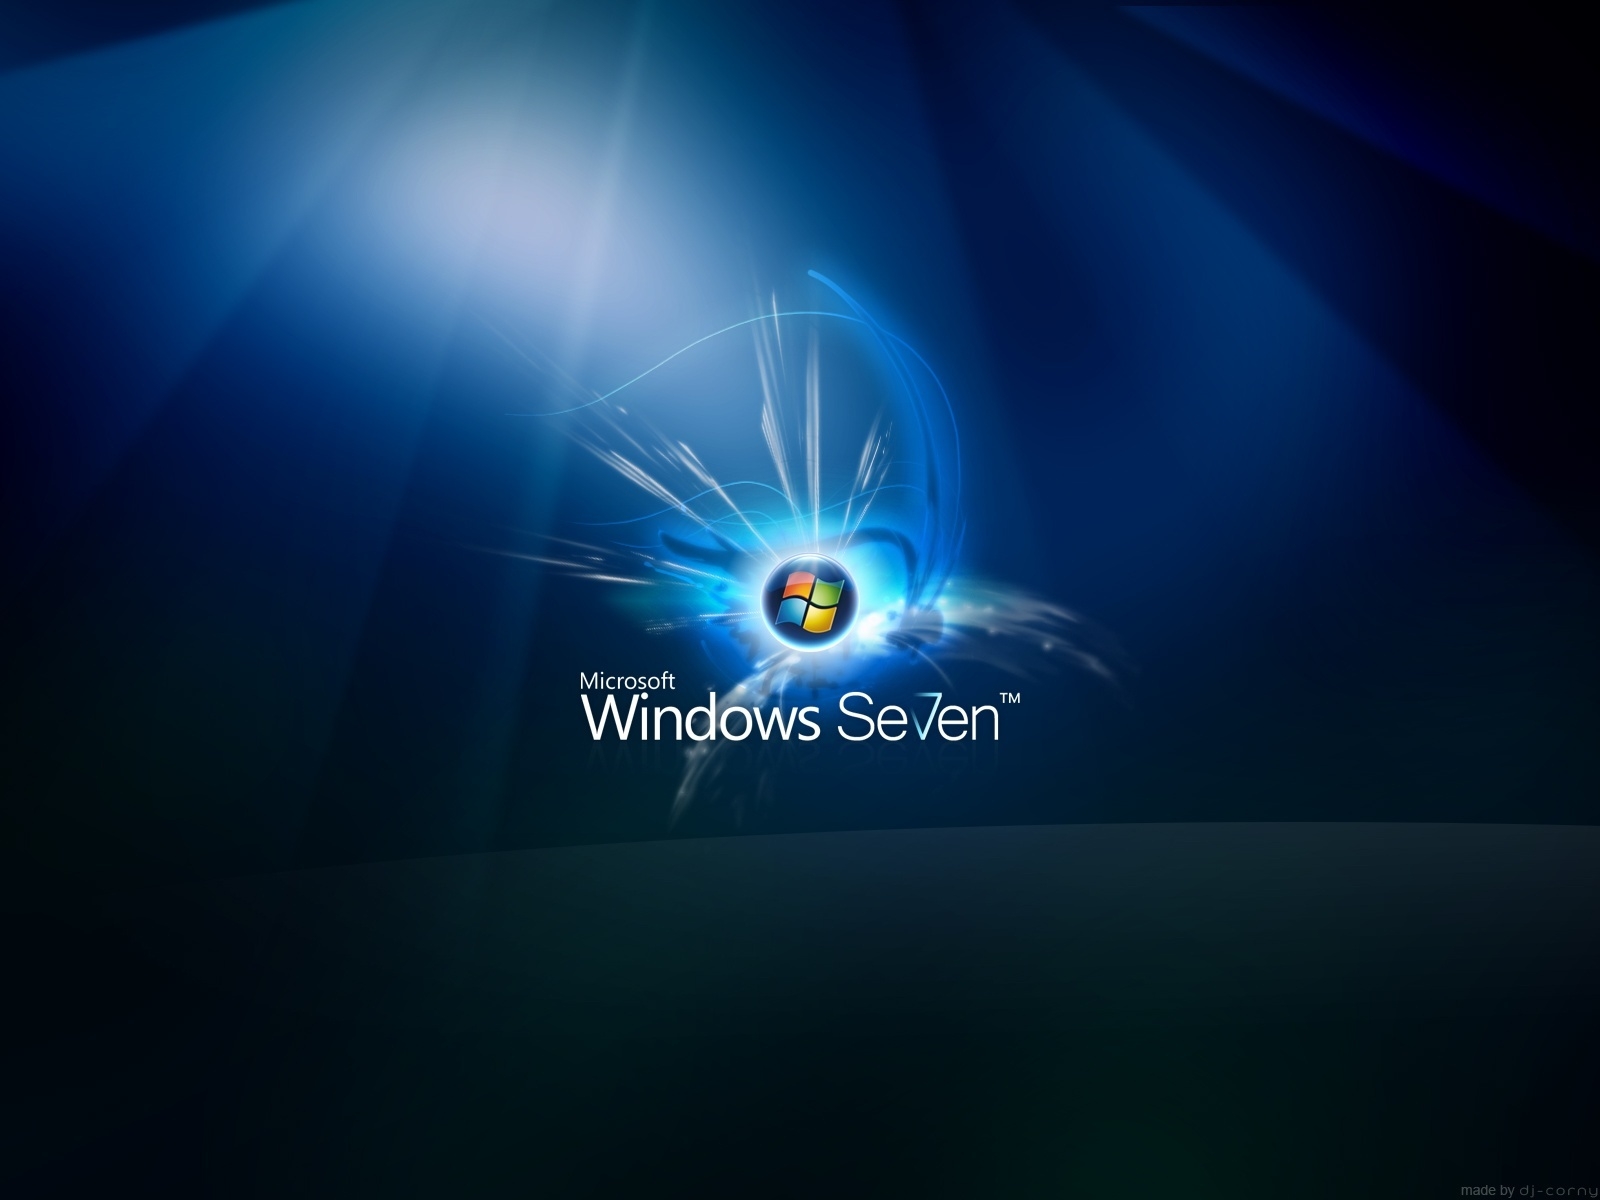 Windows Seven Glow for 1600 x 1200 resolution